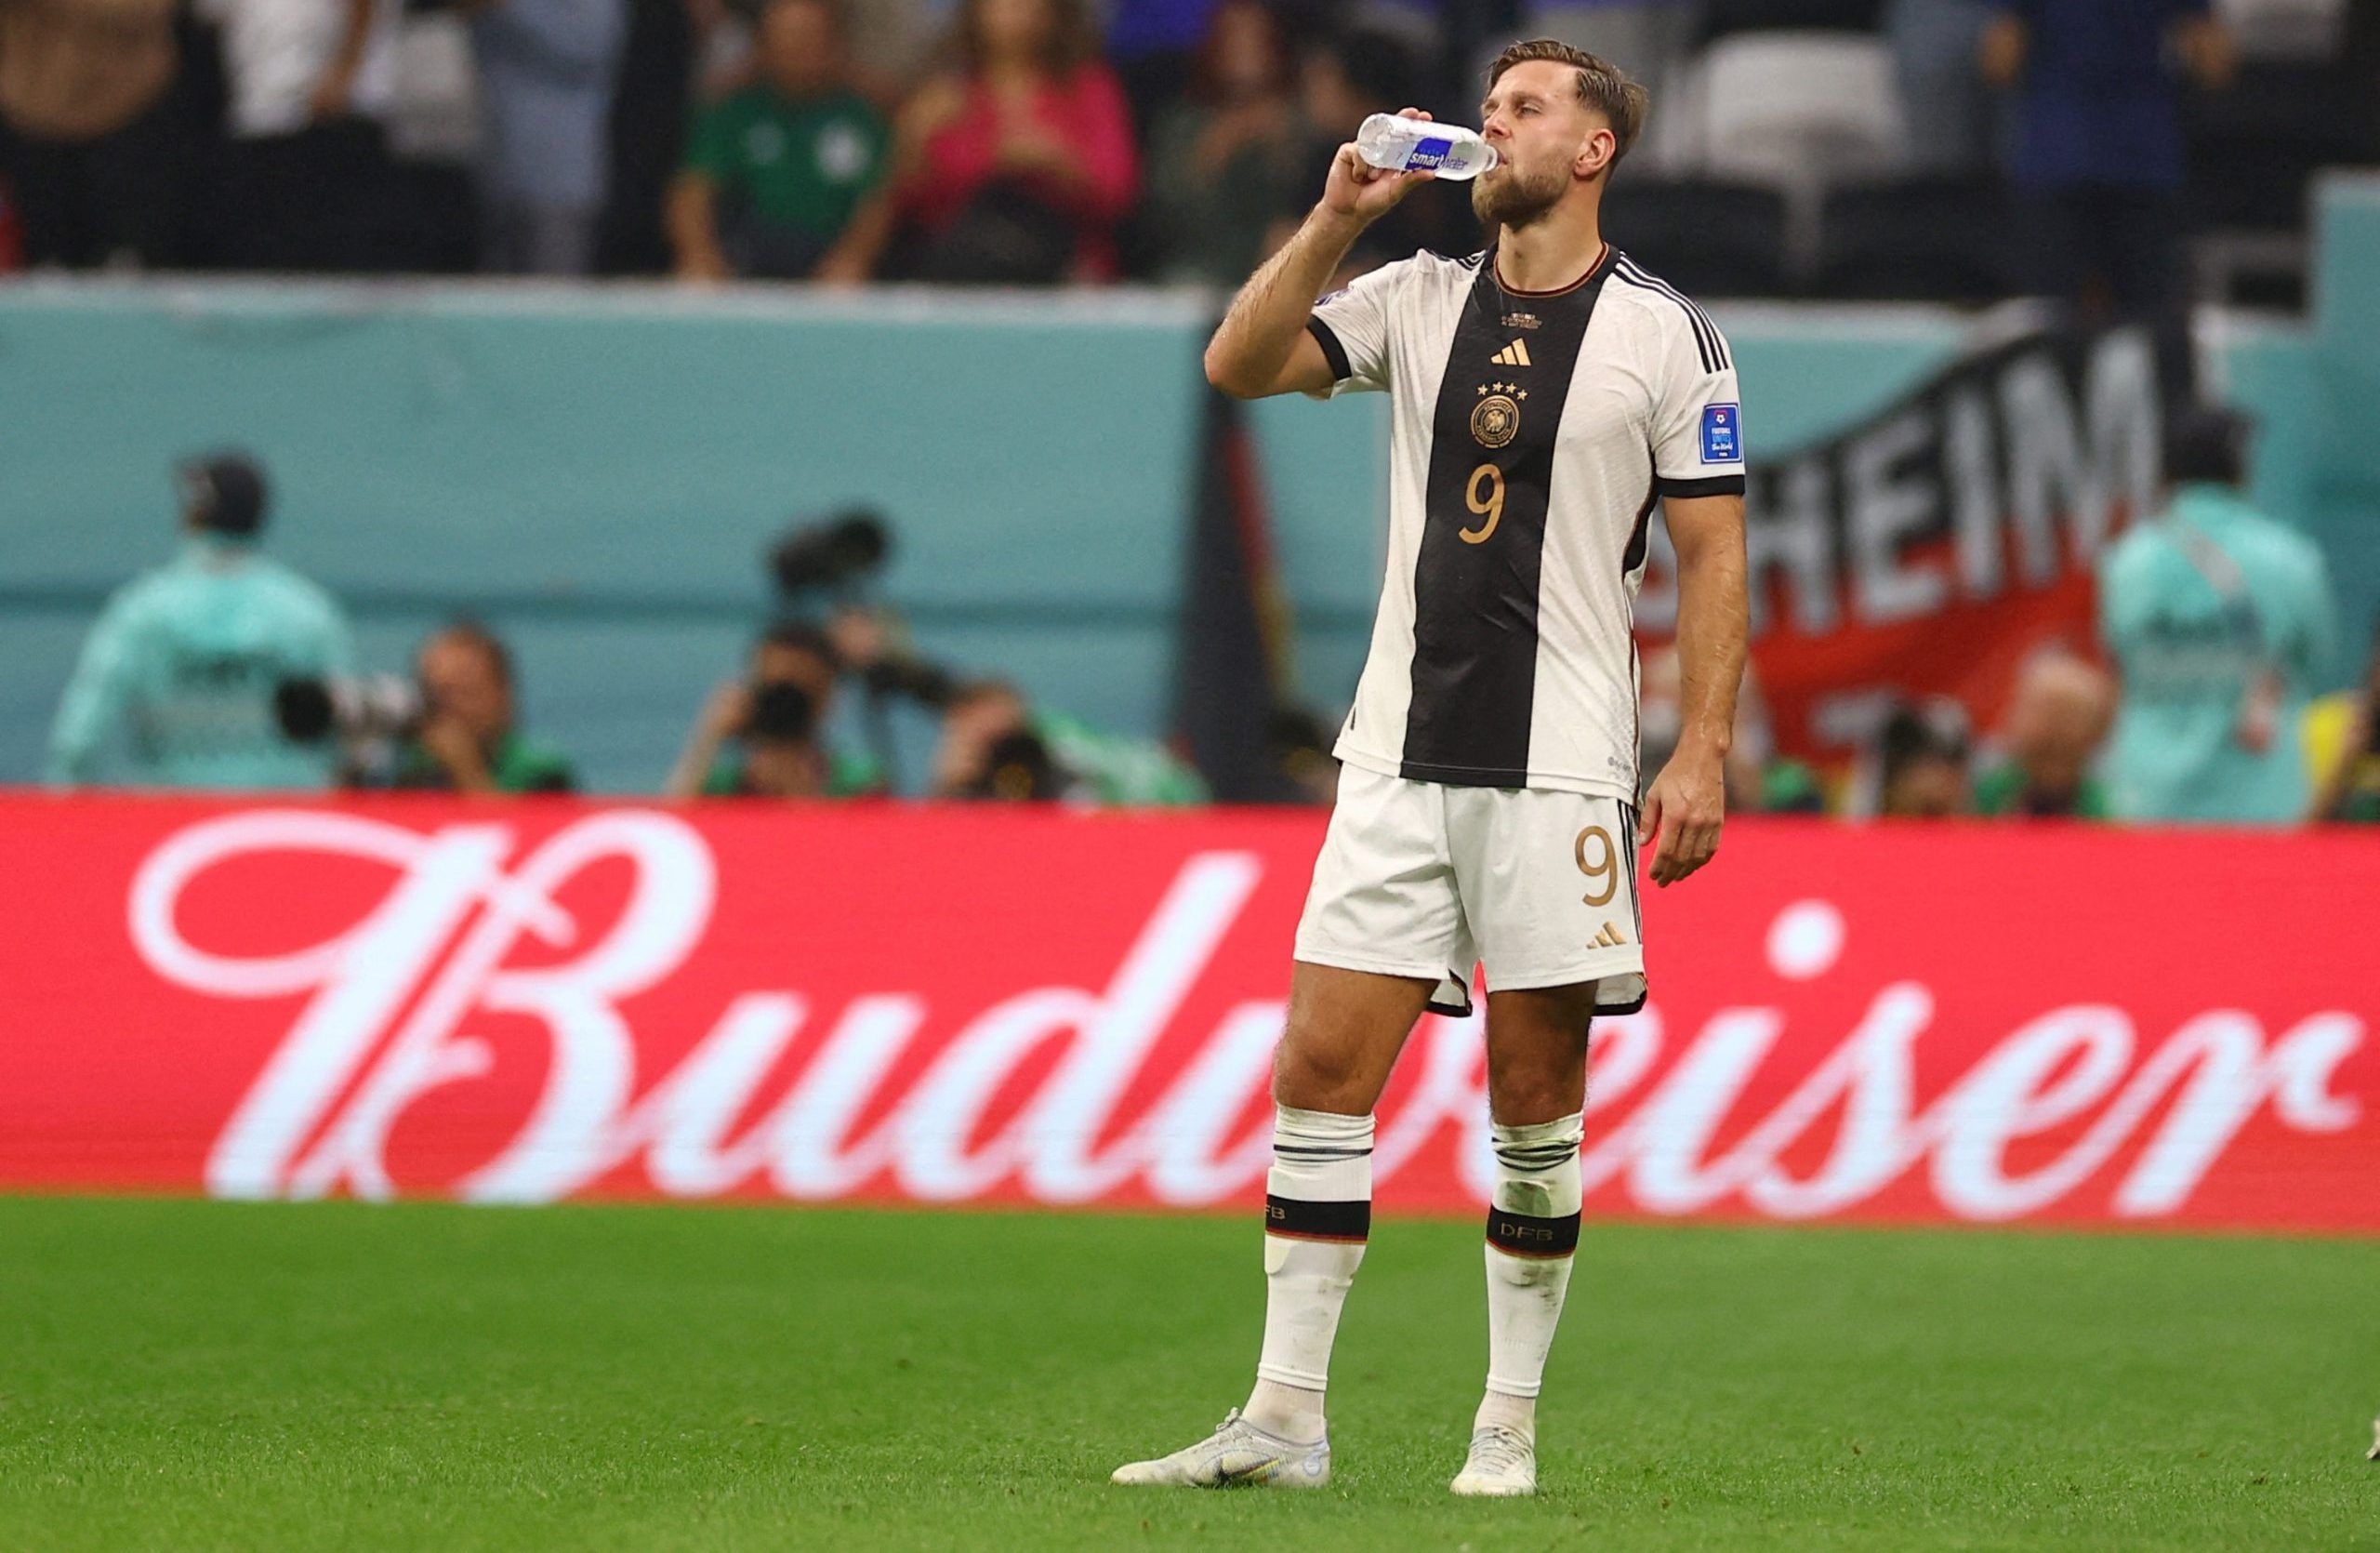 Soccer Football - FIFA World Cup Qatar 2022 - Group E - Costa Rica v Germany - Al Bayt Stadium, Al Khor, Qatar - December 1, 2022 Germany's Niclas Fullkrug looks dejected after the match as Germany are eliminated from the World Cup REUTERS/Kai Pfaffenbach